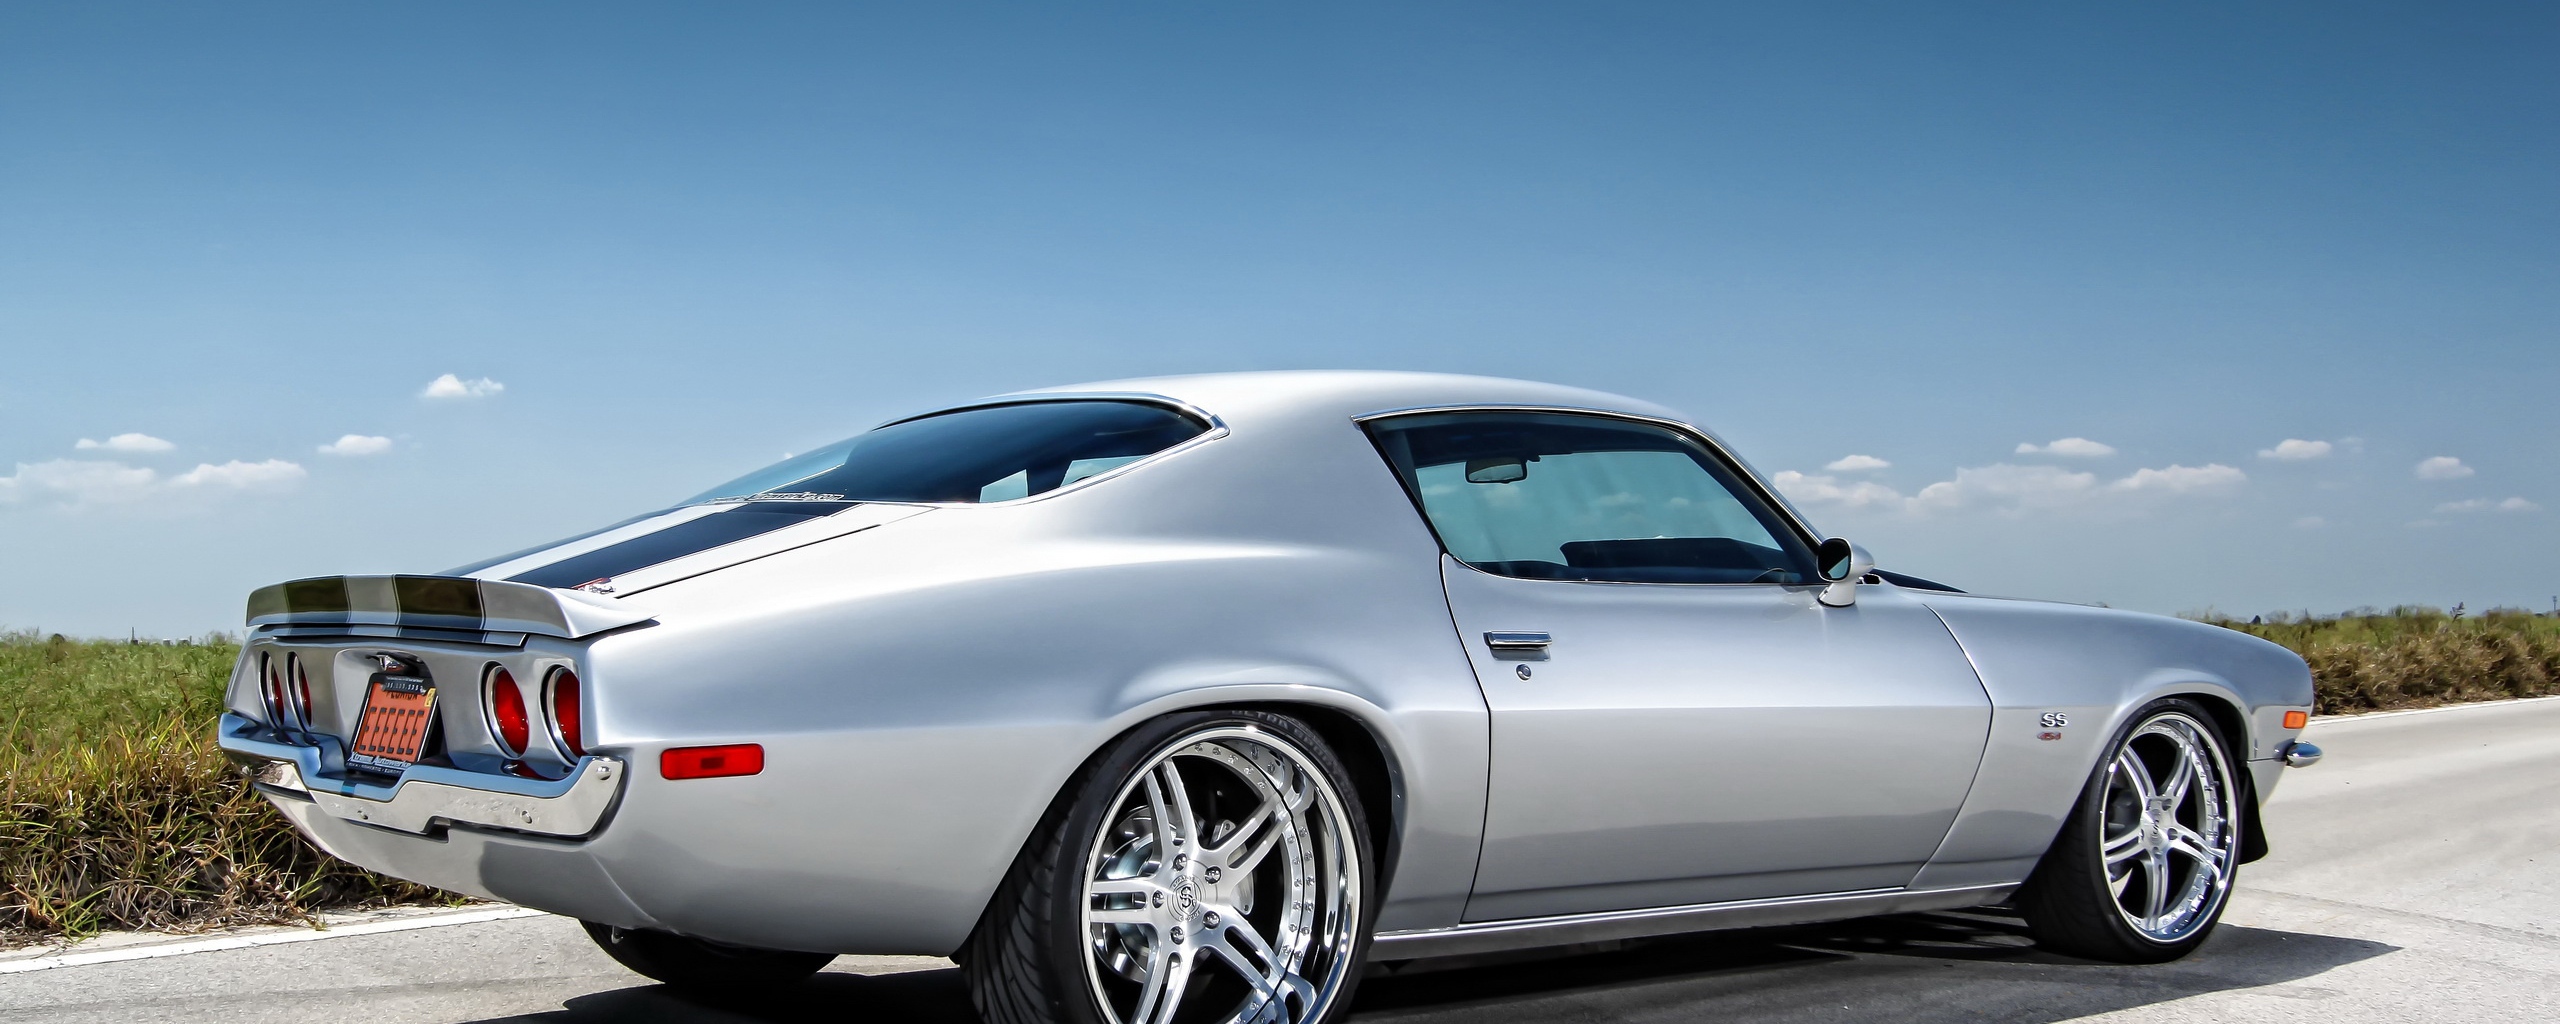 Muscle Car Chevrolet Camaro Dual Monitor Resolution HD Background